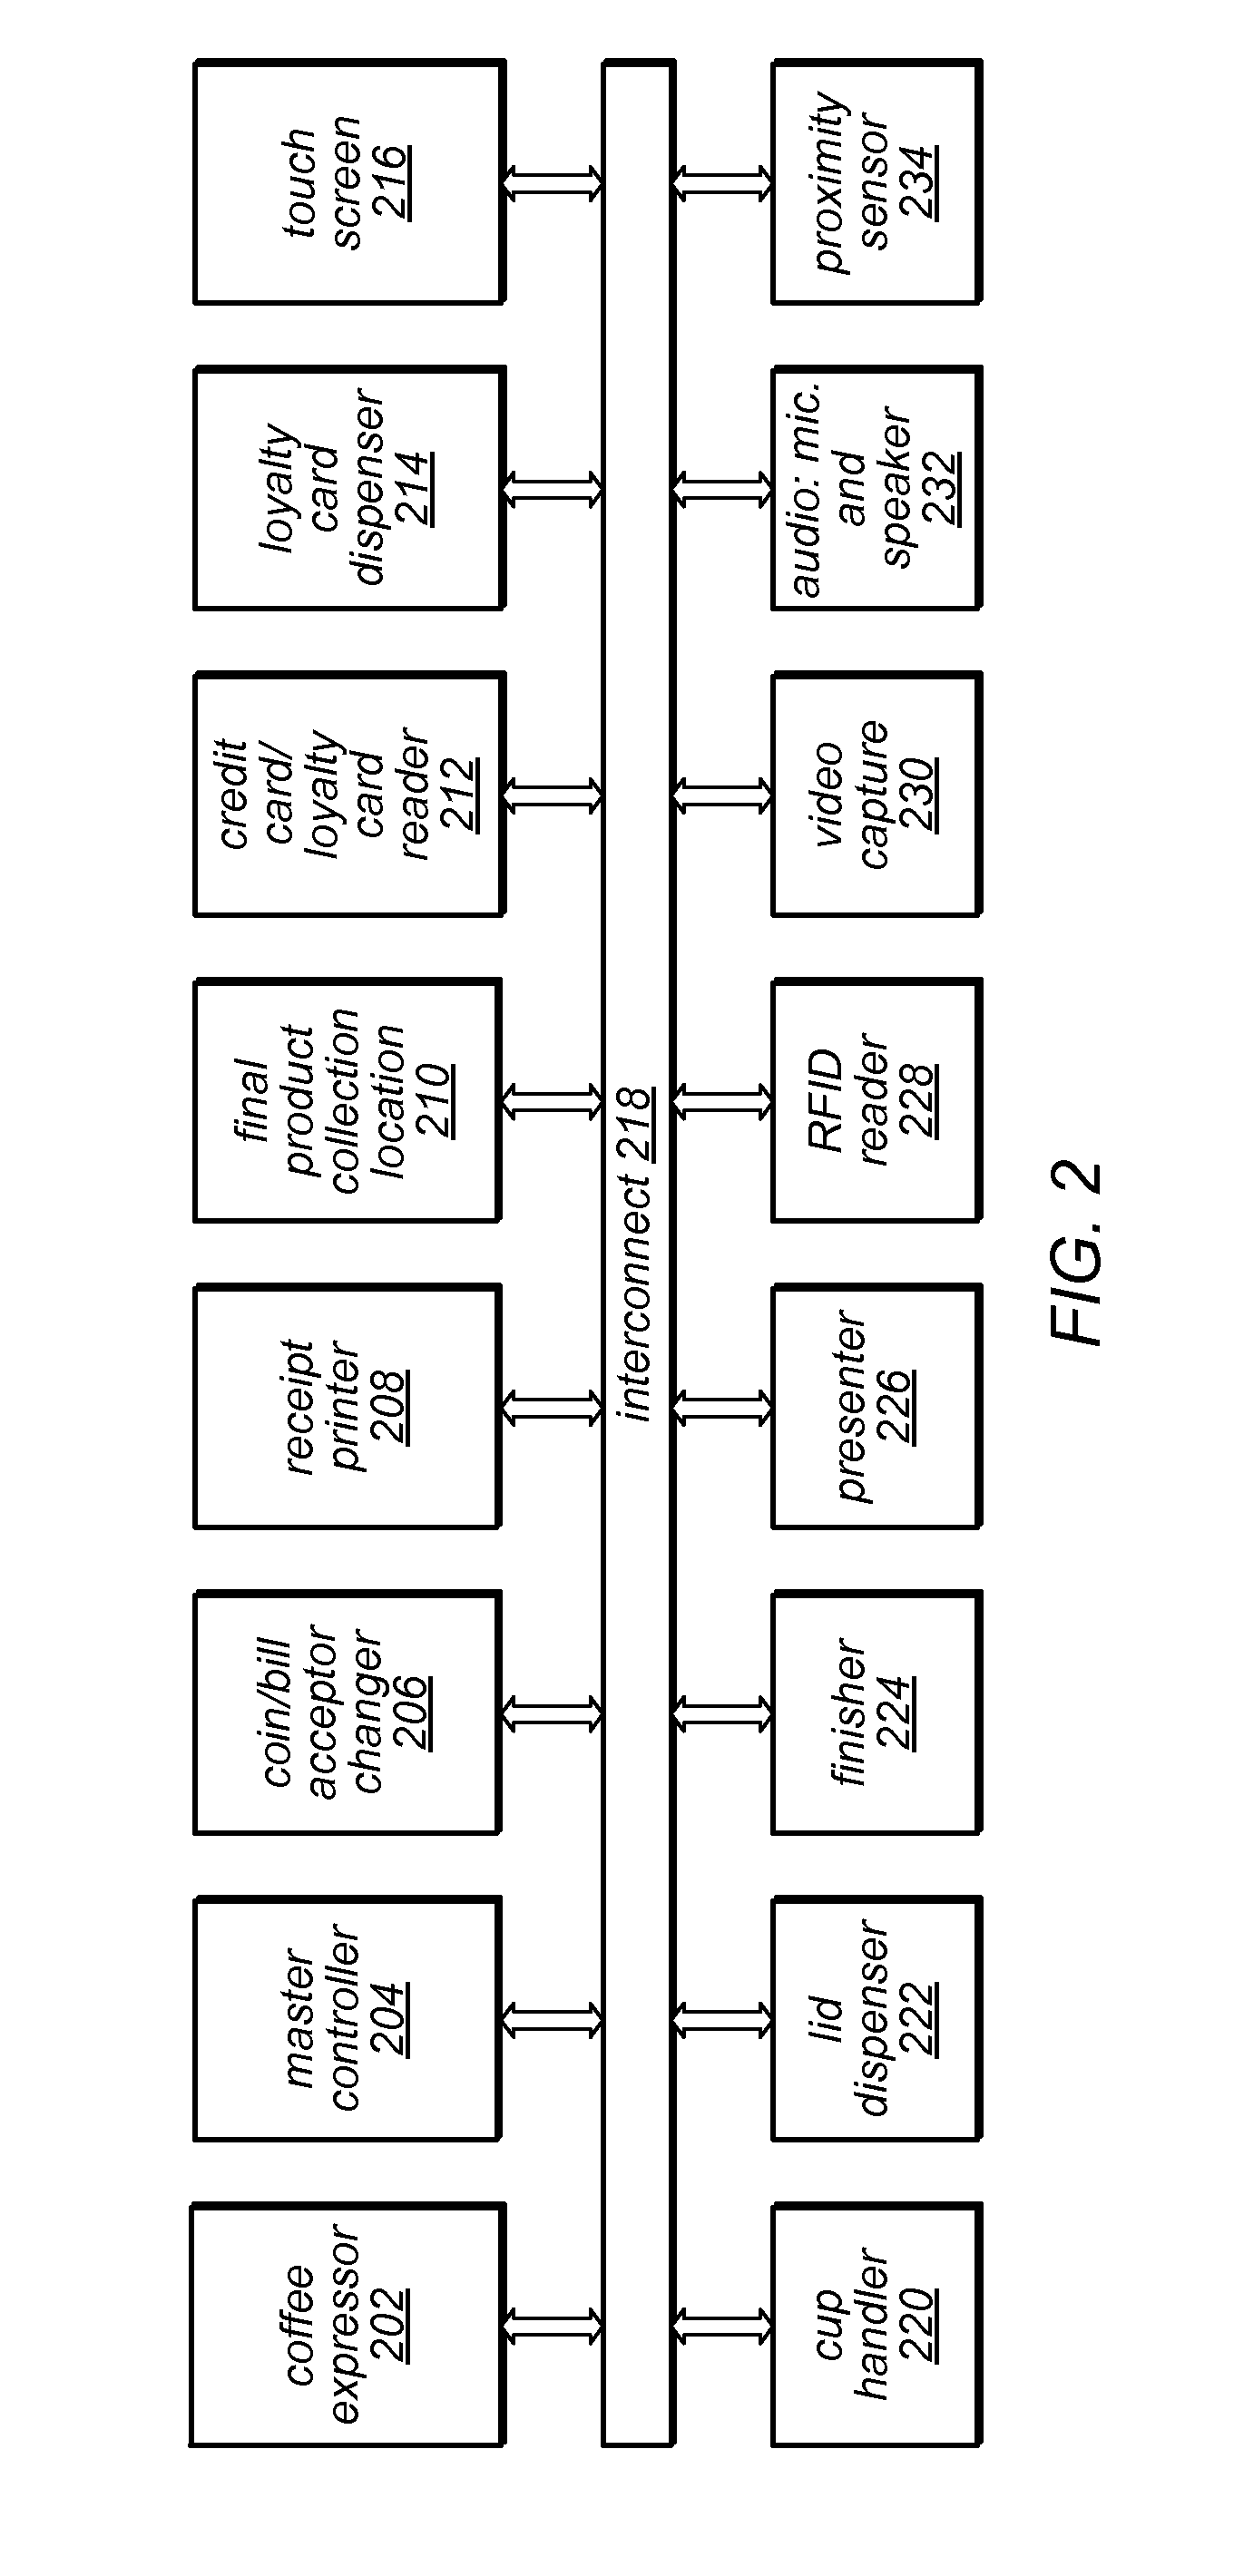 Apparatus and Method for Brewed and Espresso Drink Generation